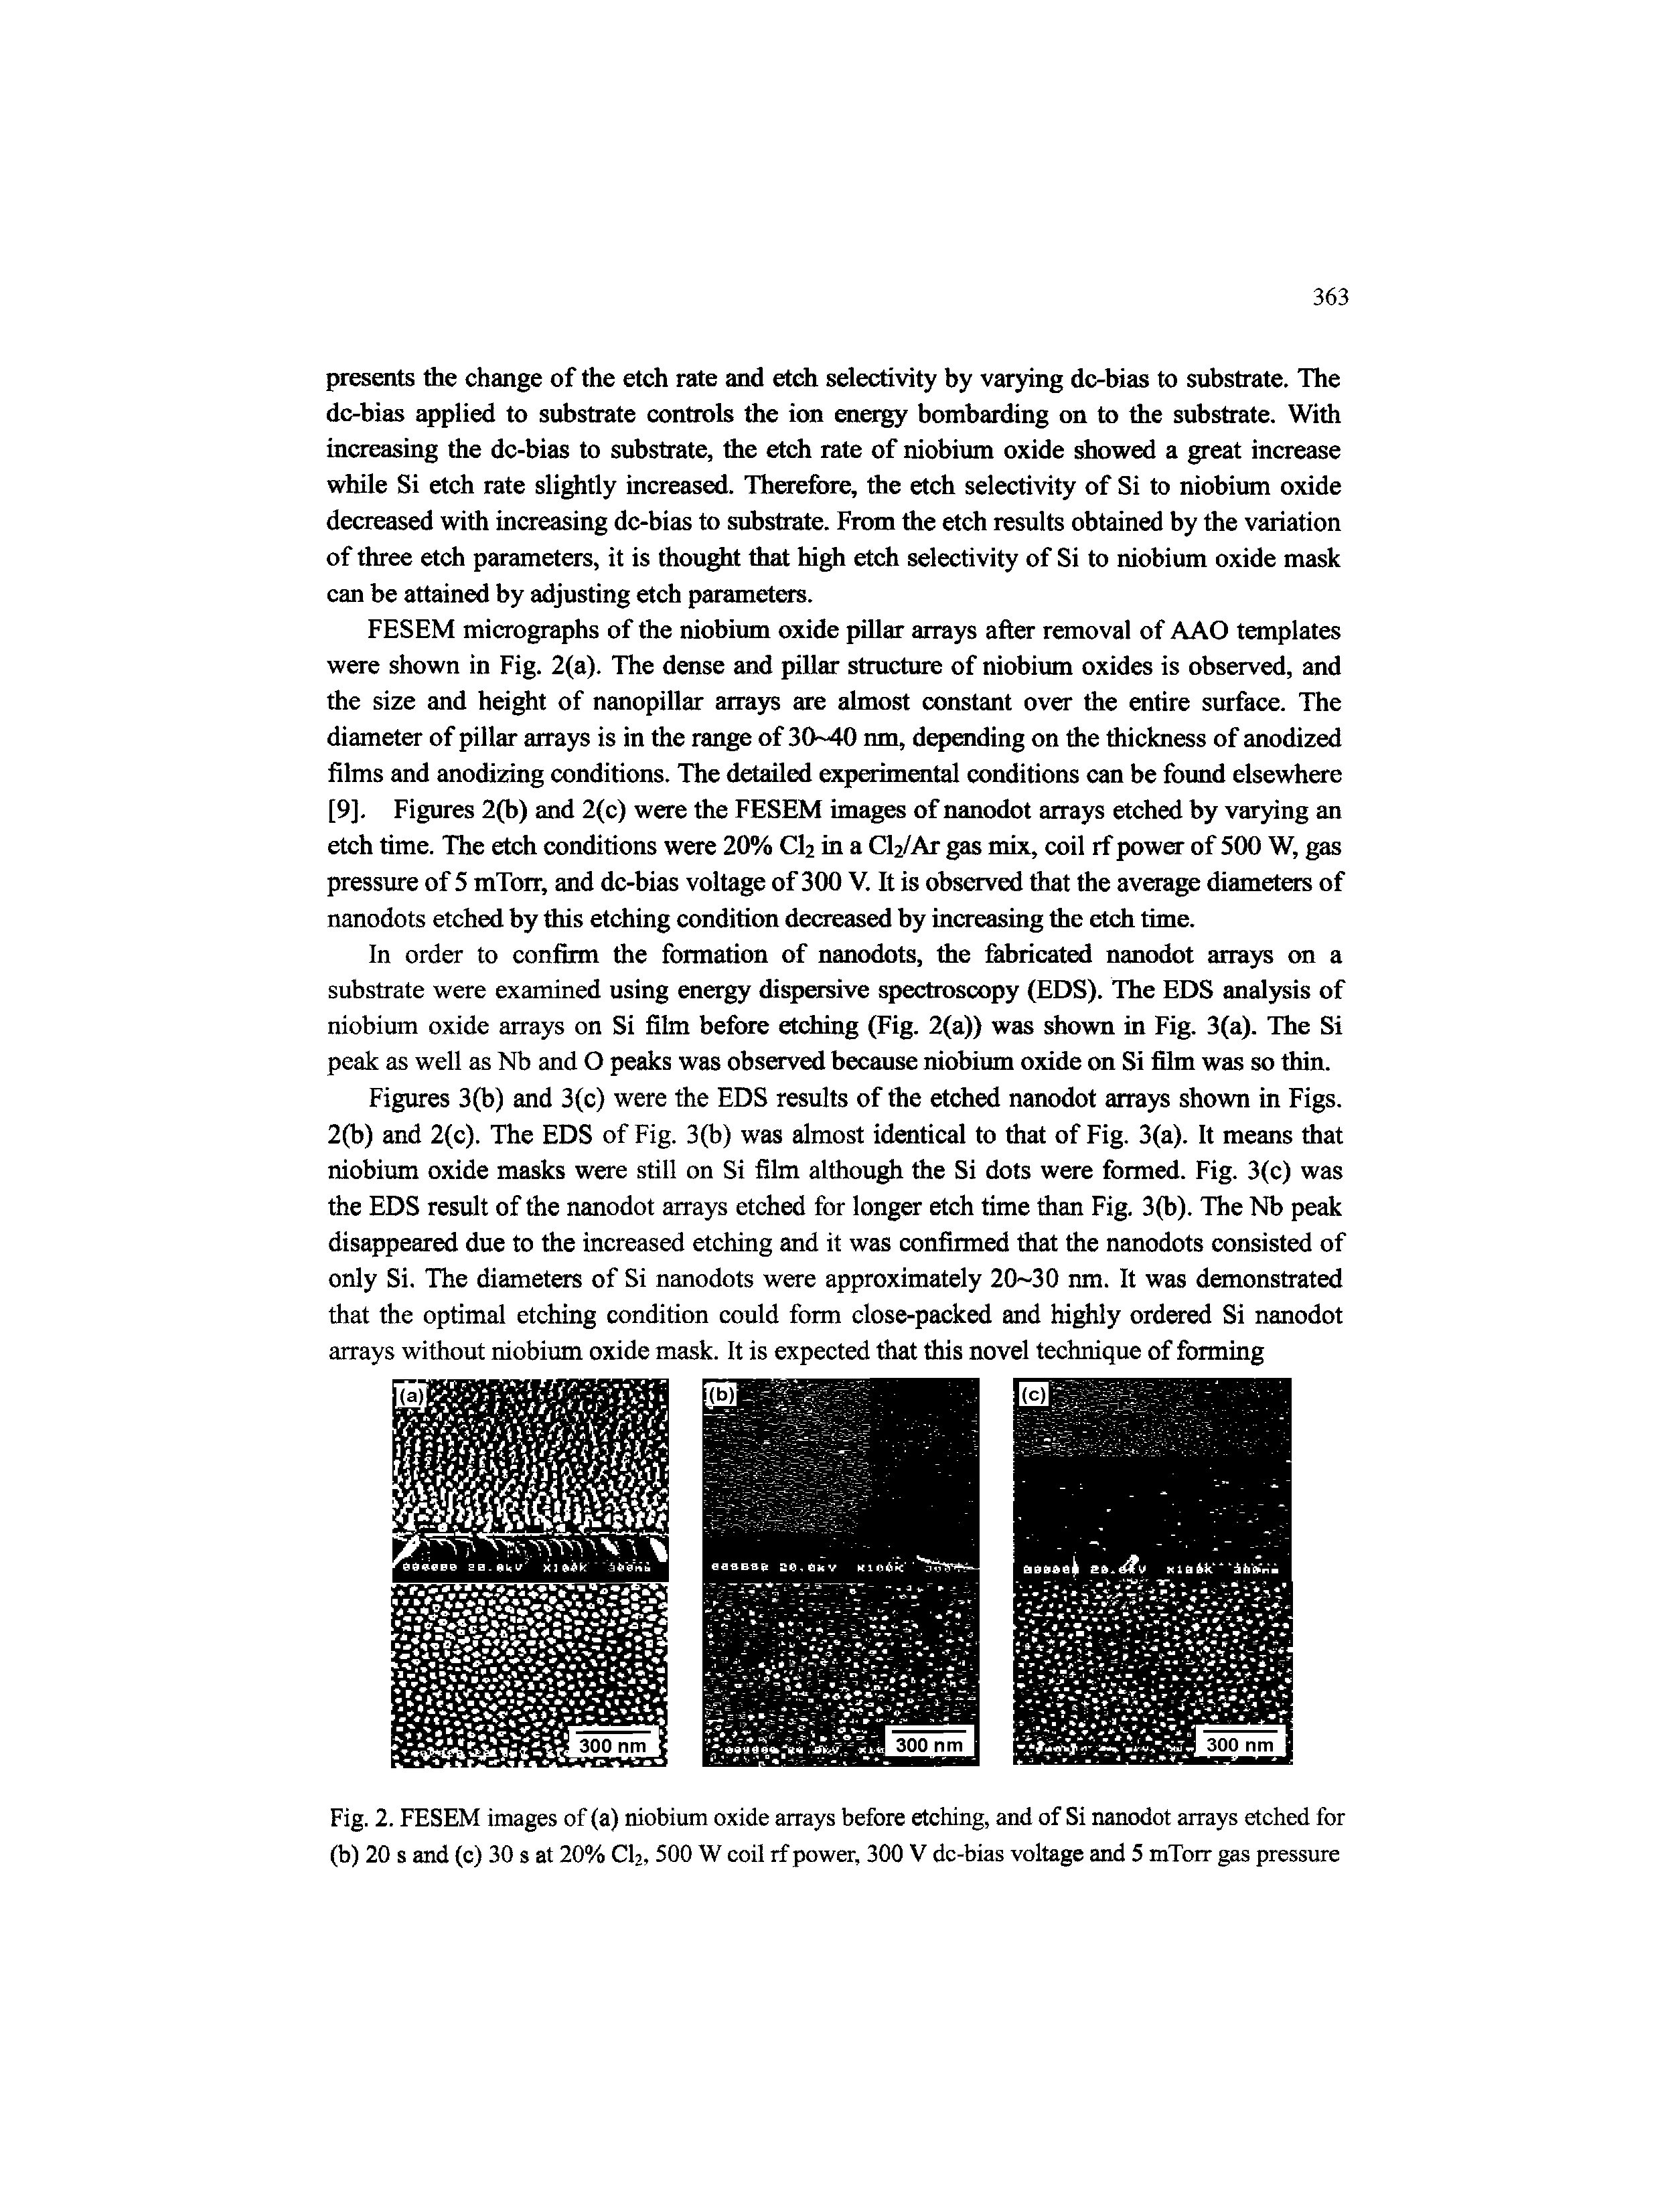 Figures 3(b) and 3(c) were the EDS results of the etched nanodot arrays shown in Figs. 2(b) and 2(c). The EDS of Fig. 3(b) was almost identical to that of Fig. 3(a). It means that niobium oxide masks were still on Si film although the Si dots were formed. Fig. 3(c) was the EDS result of the nanodot arrays etched for longer etch time than Fig. 3(b). The Nb peak disappeared due to the increased etching and it was confirmed that the nanodots consisted of only Si. The diameters of Si nanodots were approximately 20 30 nm. It was demonstrated that the optimal etching condition could form close-packed and highly ordered Si nanodot arrays without niobium oxide mask. It is expected that this novel technique of forming...